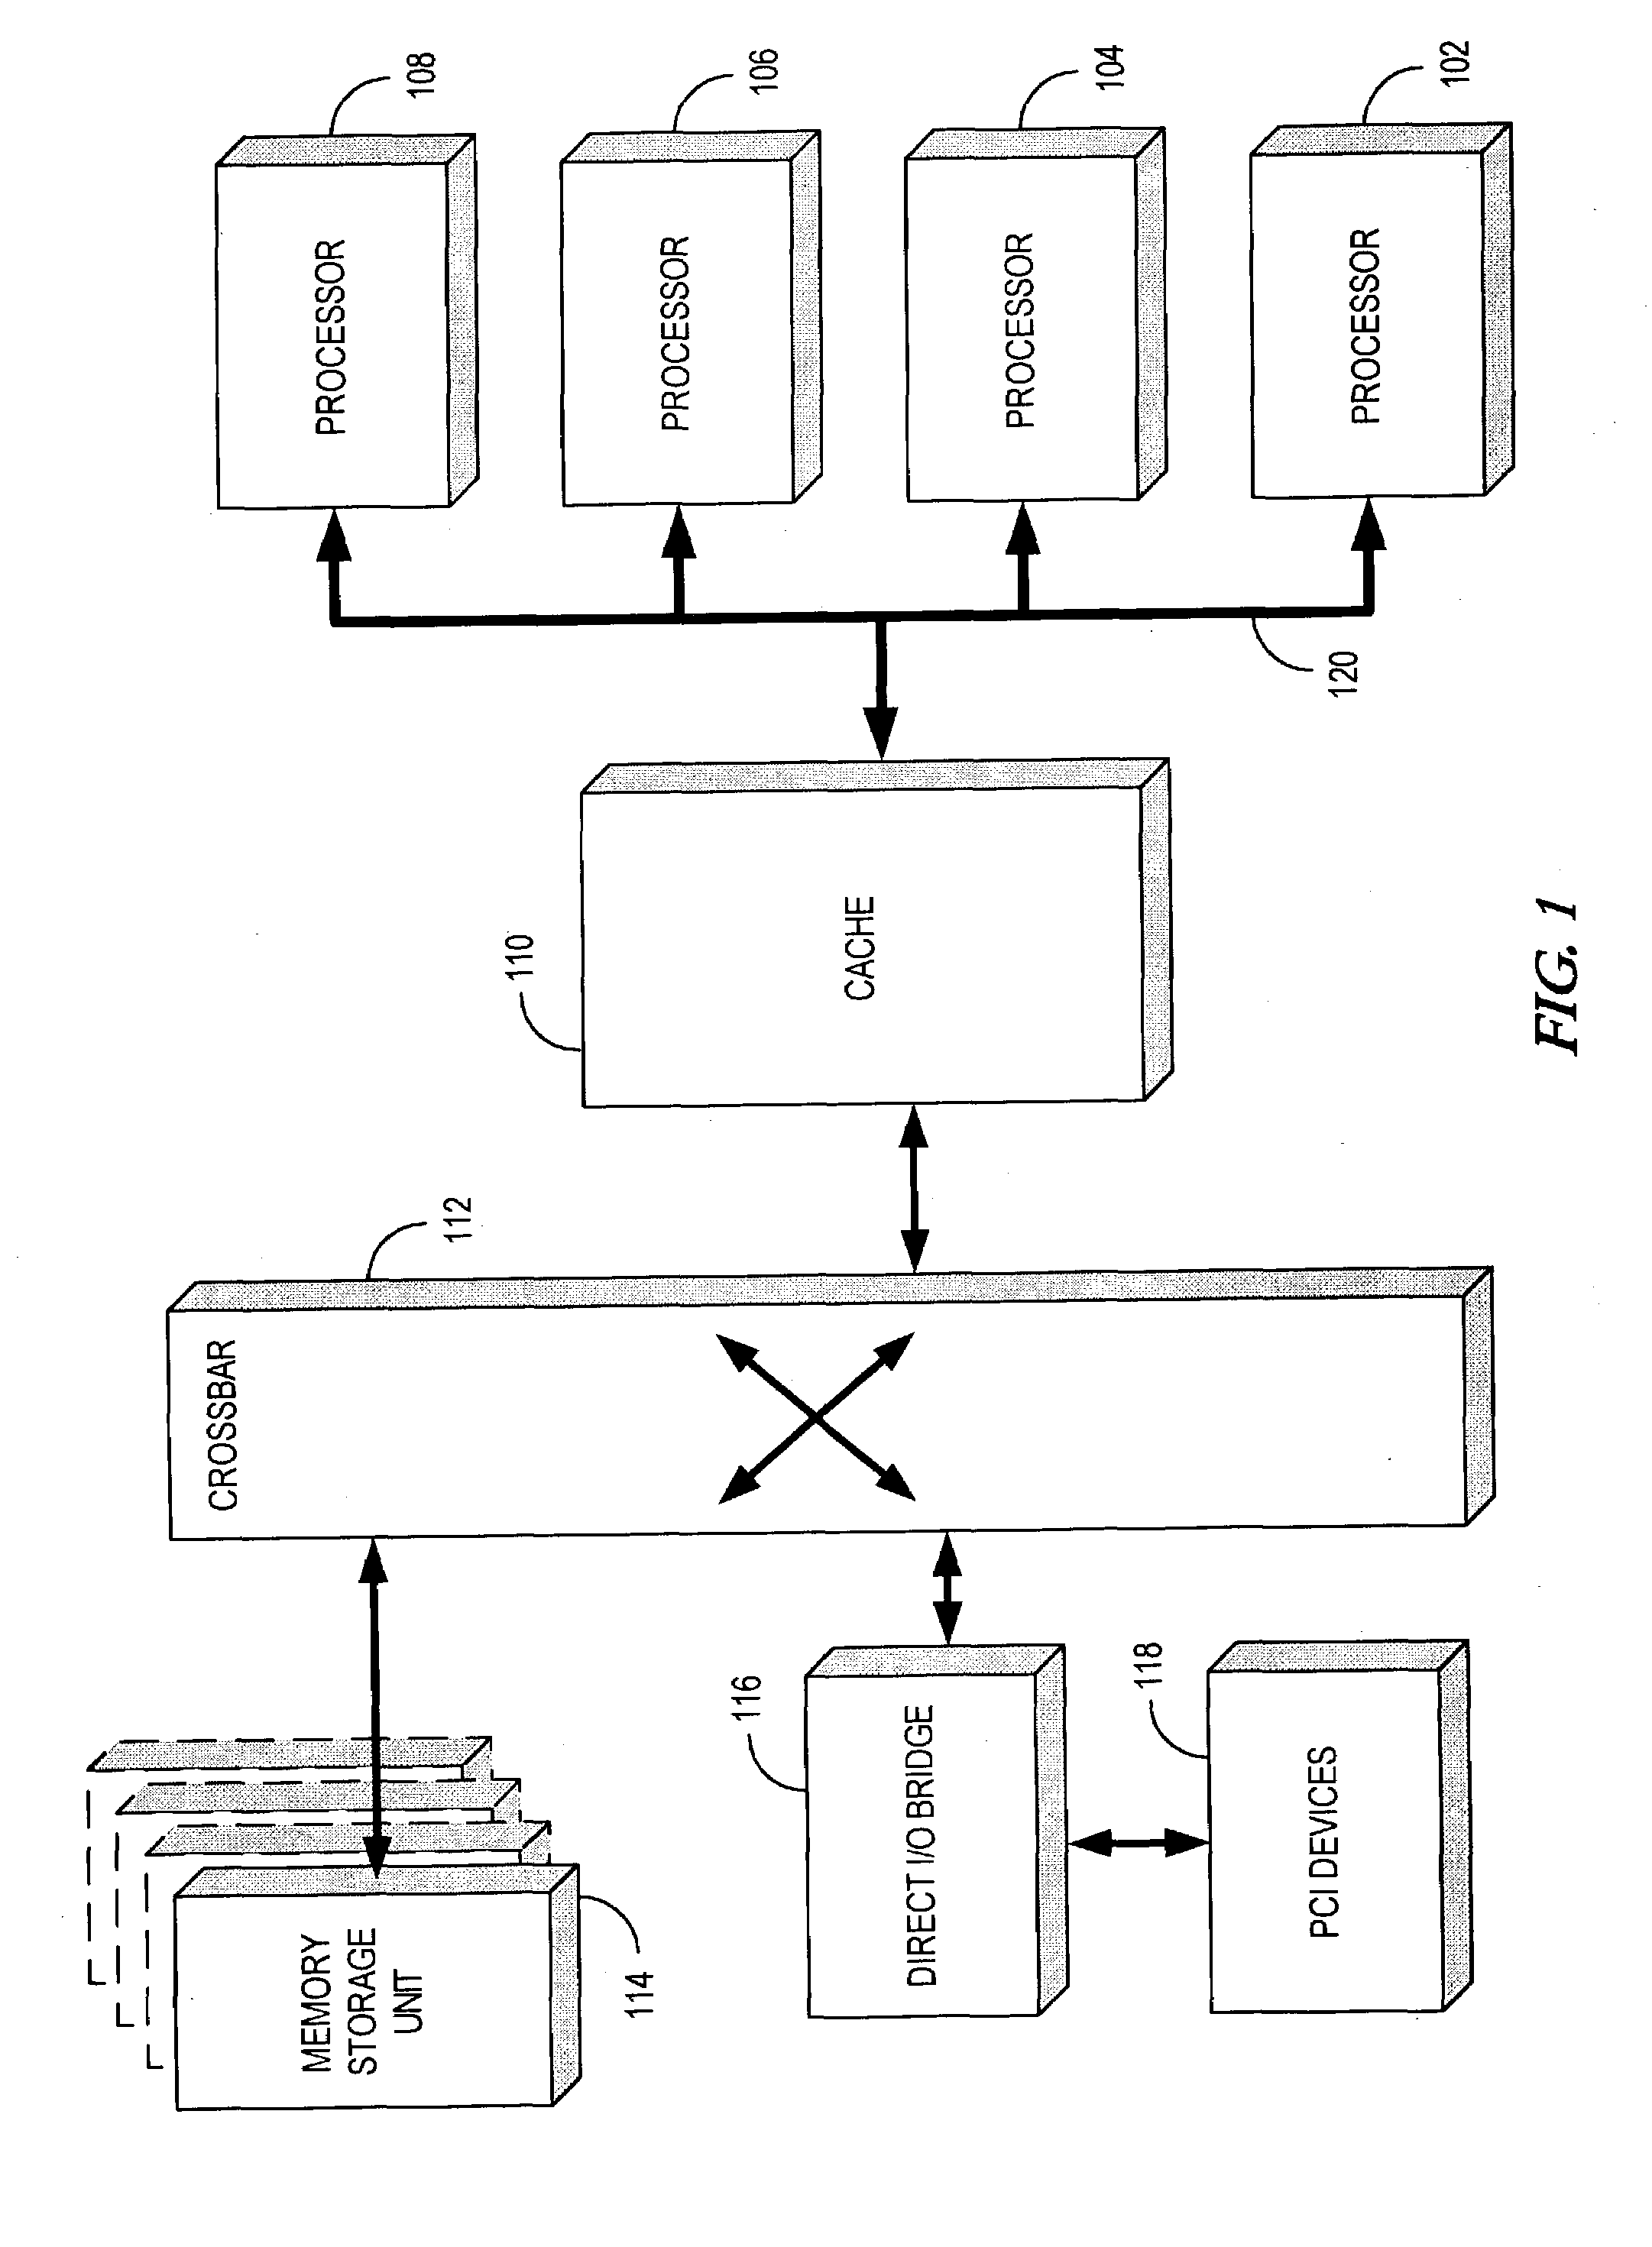 Method and apparatus for recording and monitoring bus activity in a multi-processor environment